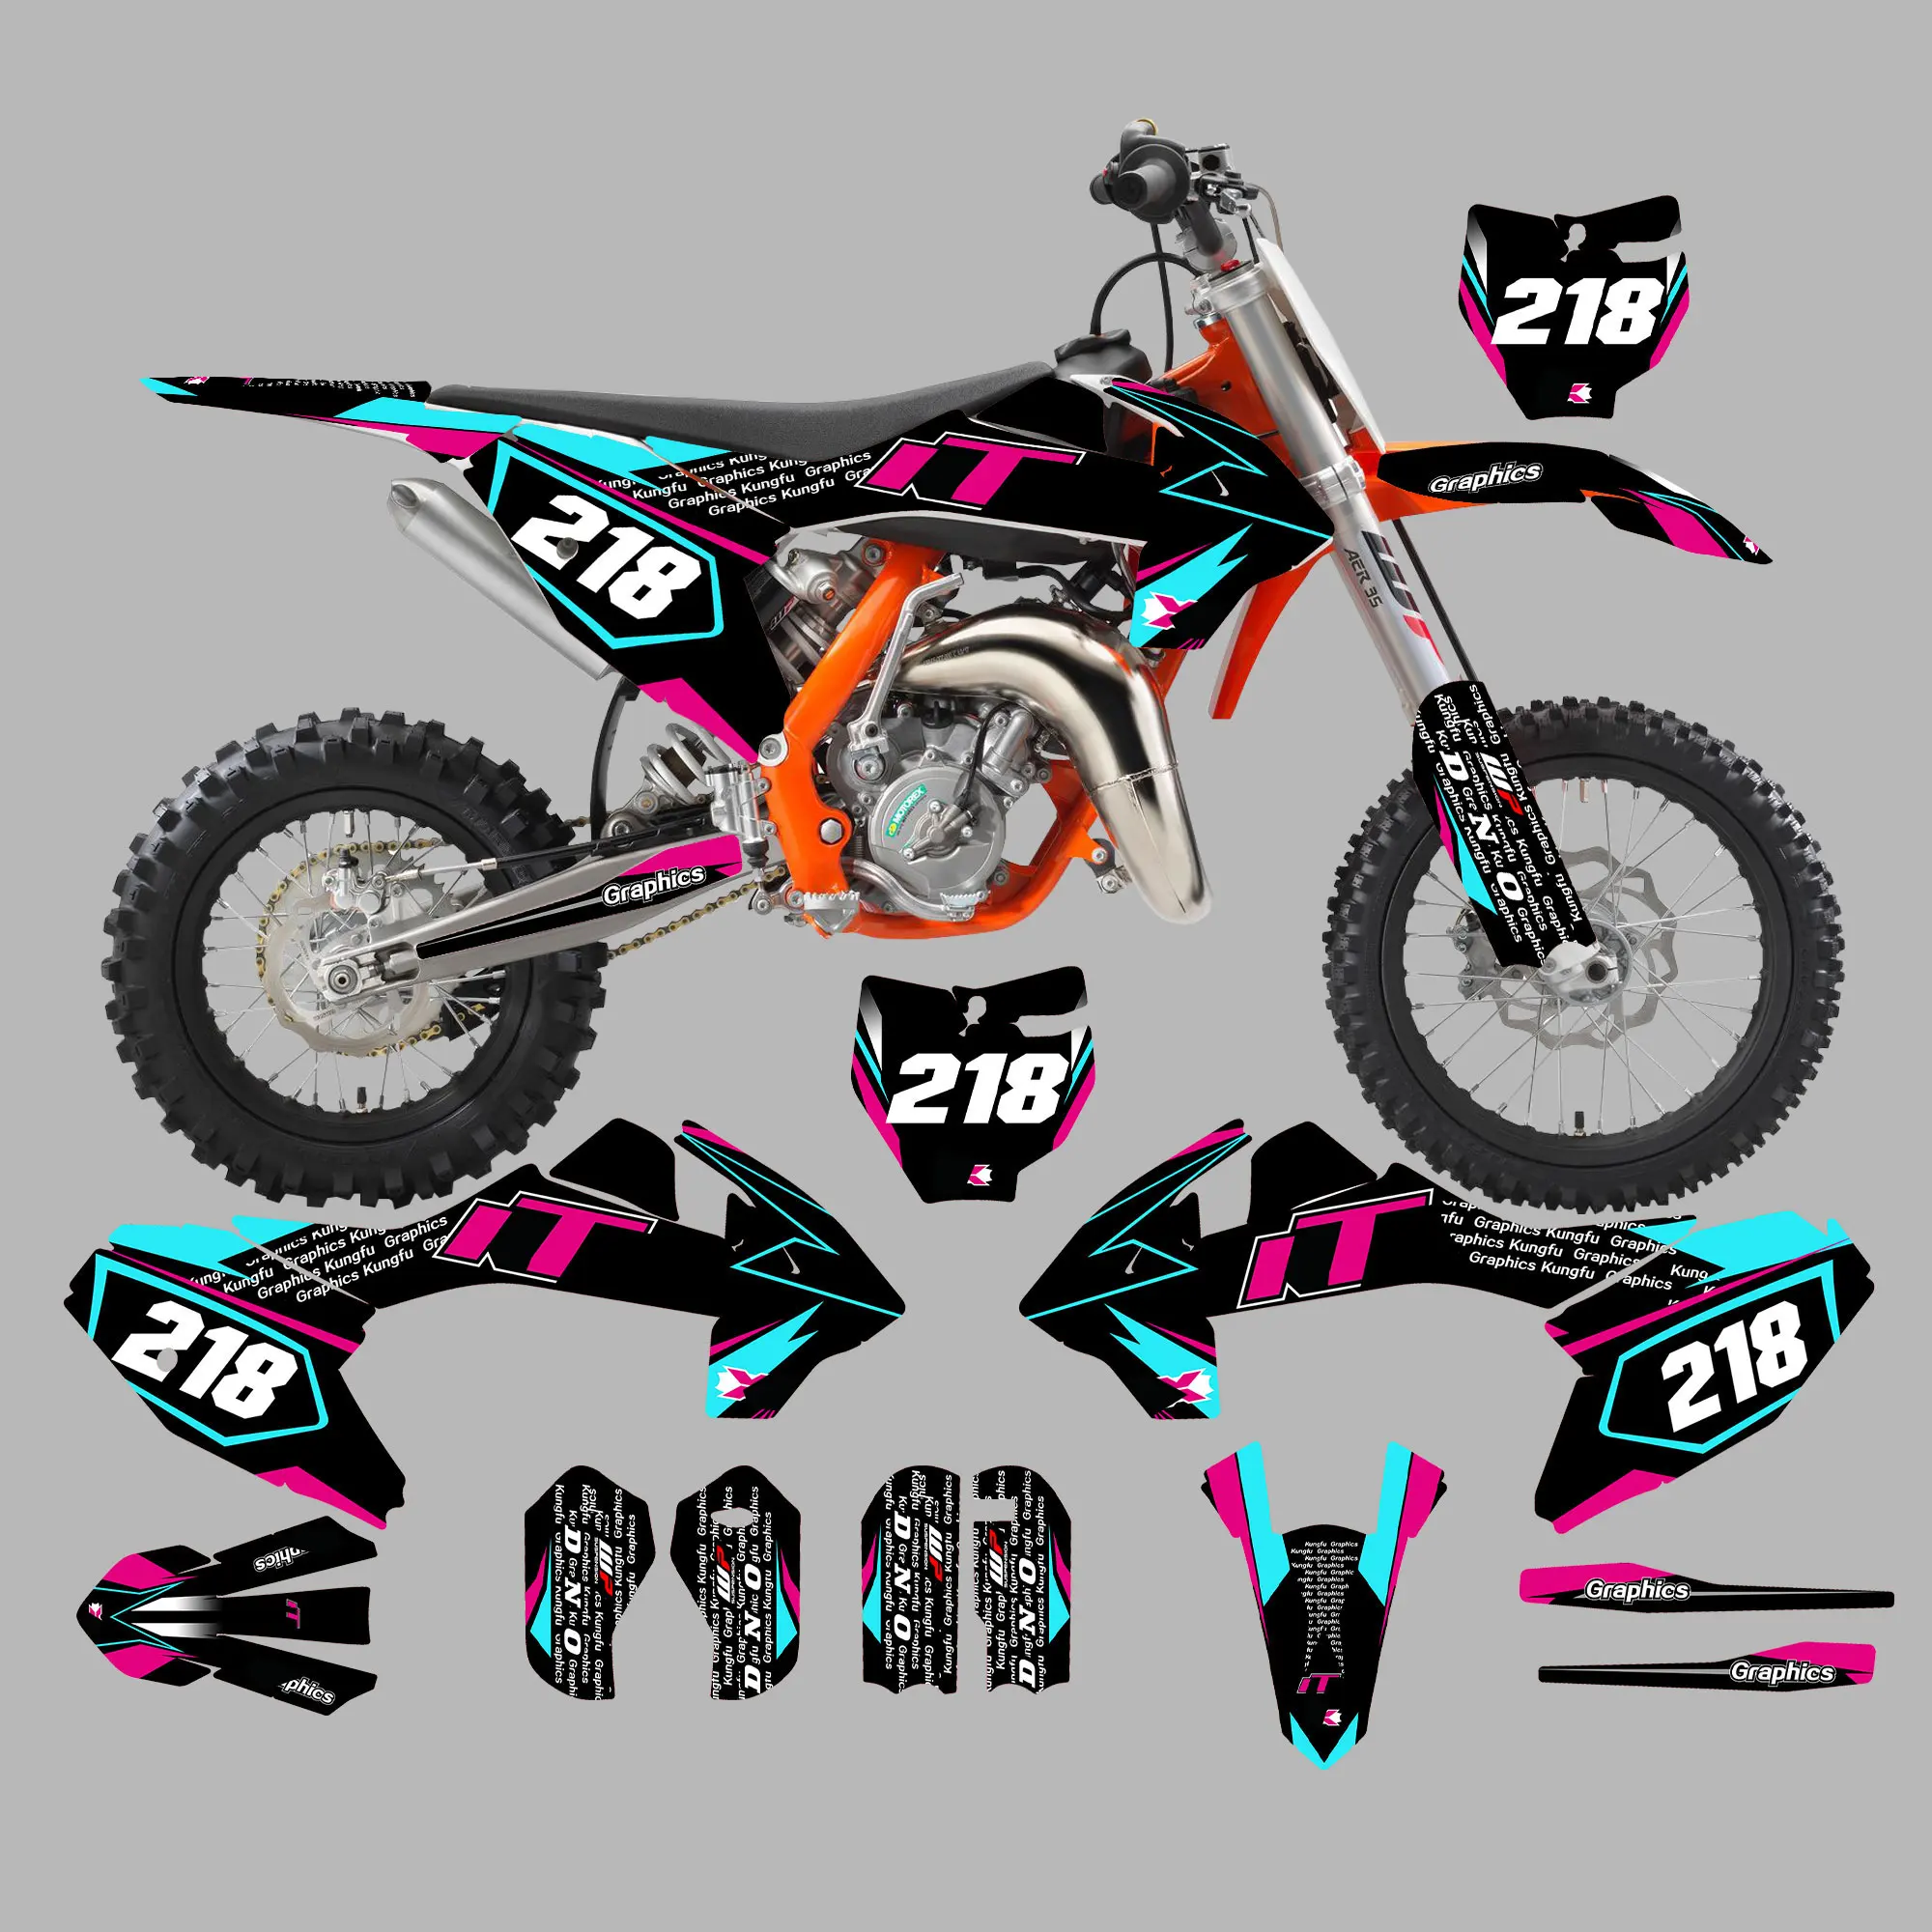 Graphic Kit for 2021 2022 MC65 SX65   2016 2017 2018 2019 2020 2021 2022 SX65  Motocross Decals Sticker mxgp 2019 the official motocross videogame pc